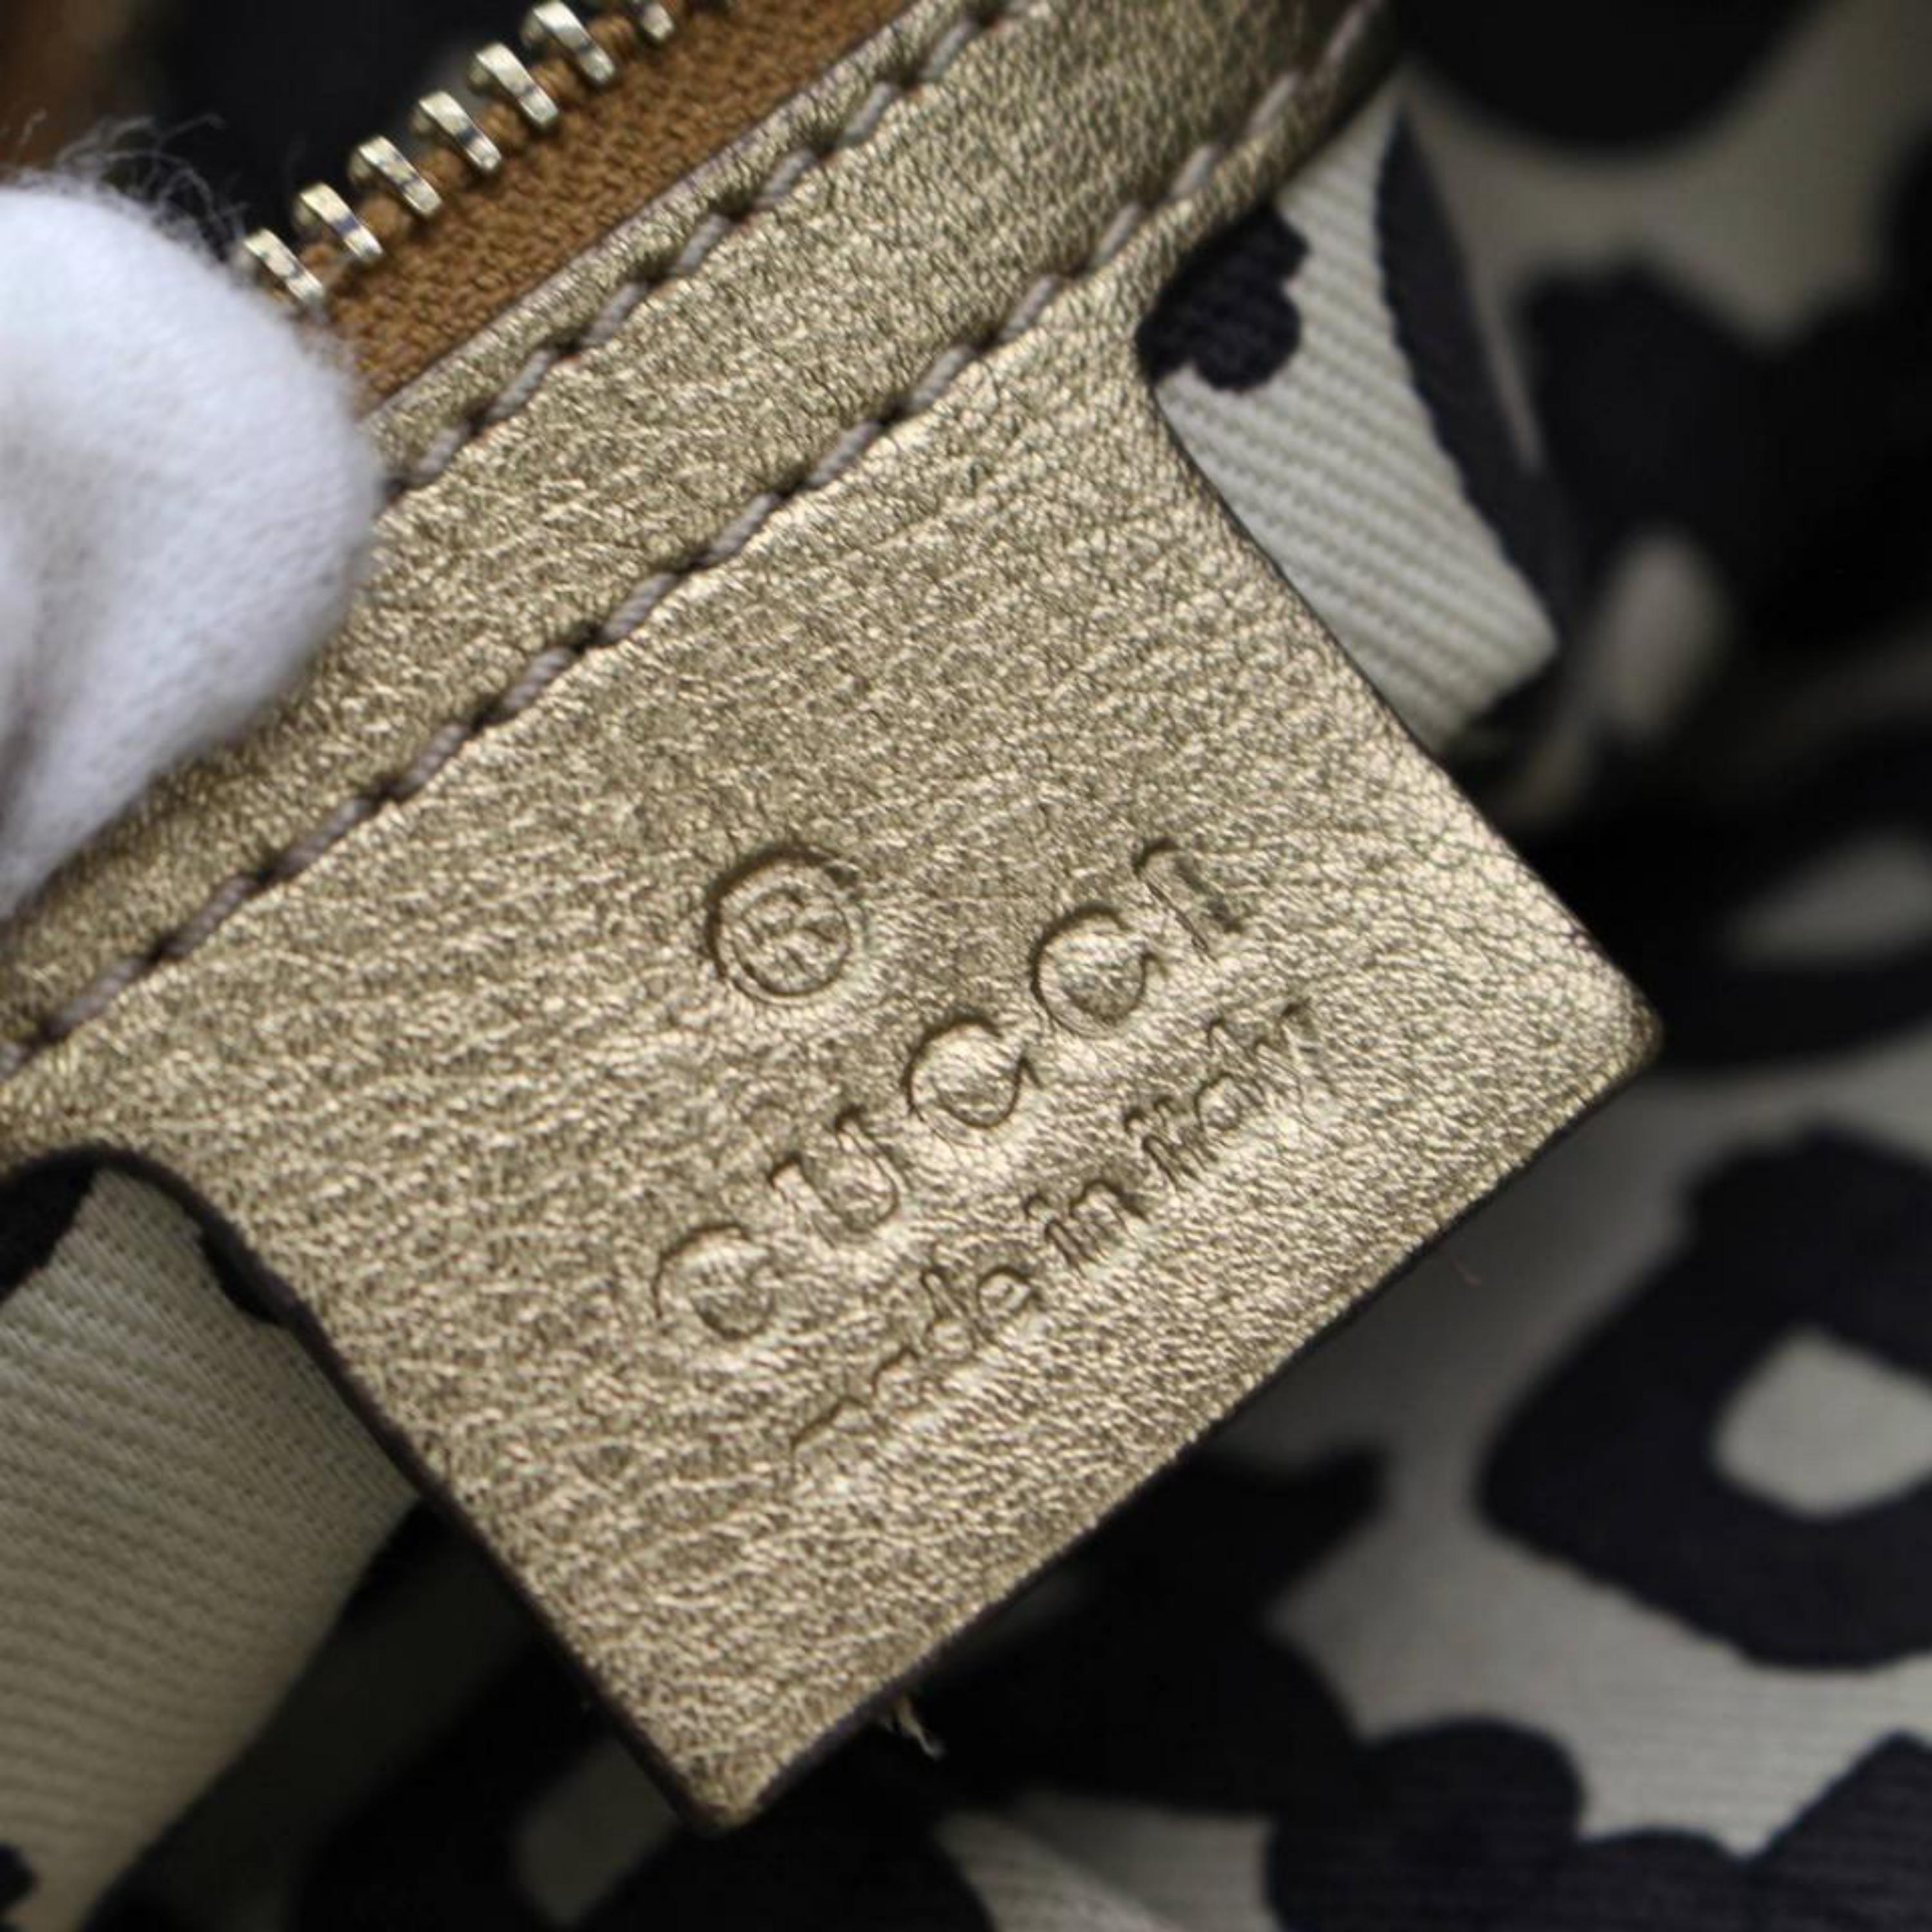 Gucci Monogram Gg Gold Web 867494 Beige Canvas Cross Body Bag In Good Condition For Sale In Forest Hills, NY